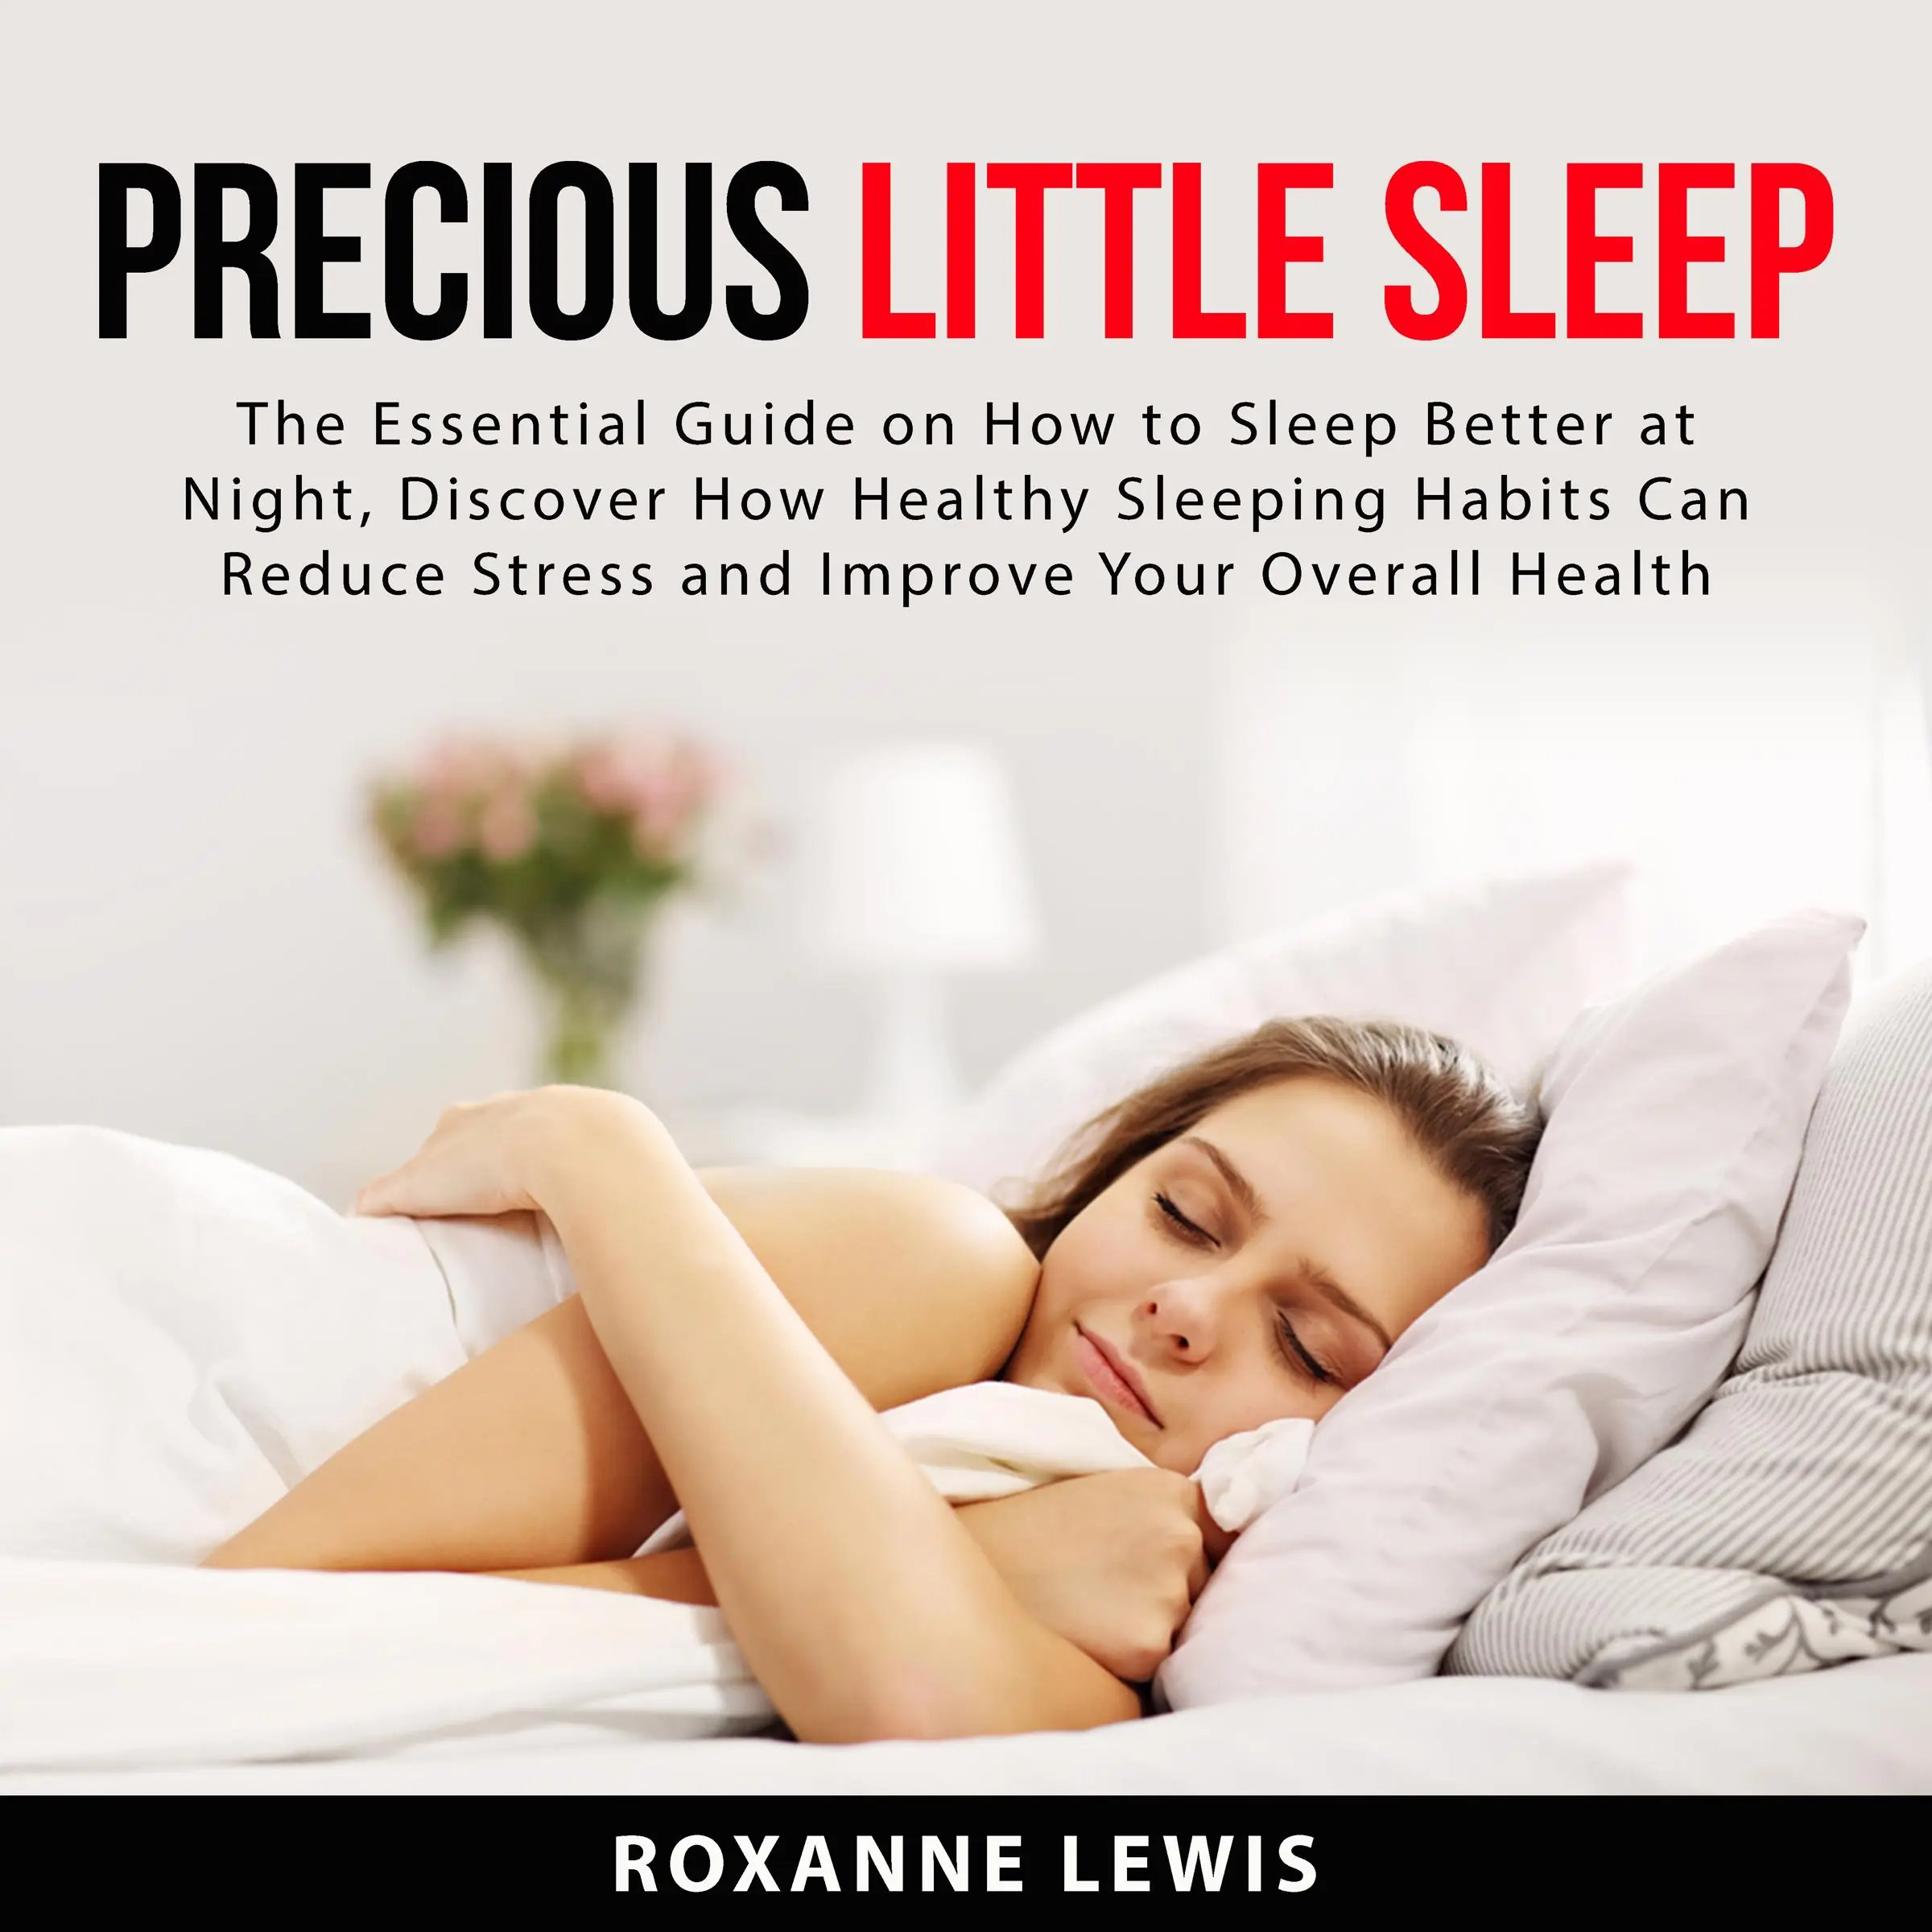 Precious Little Sleep: The Essential Guide on How to Sleep Better at Night, Discover How Healthy Sleeping Habits Can Reduce Stress and Improve Your Overall Health Audiobook by Roxanne Lewis